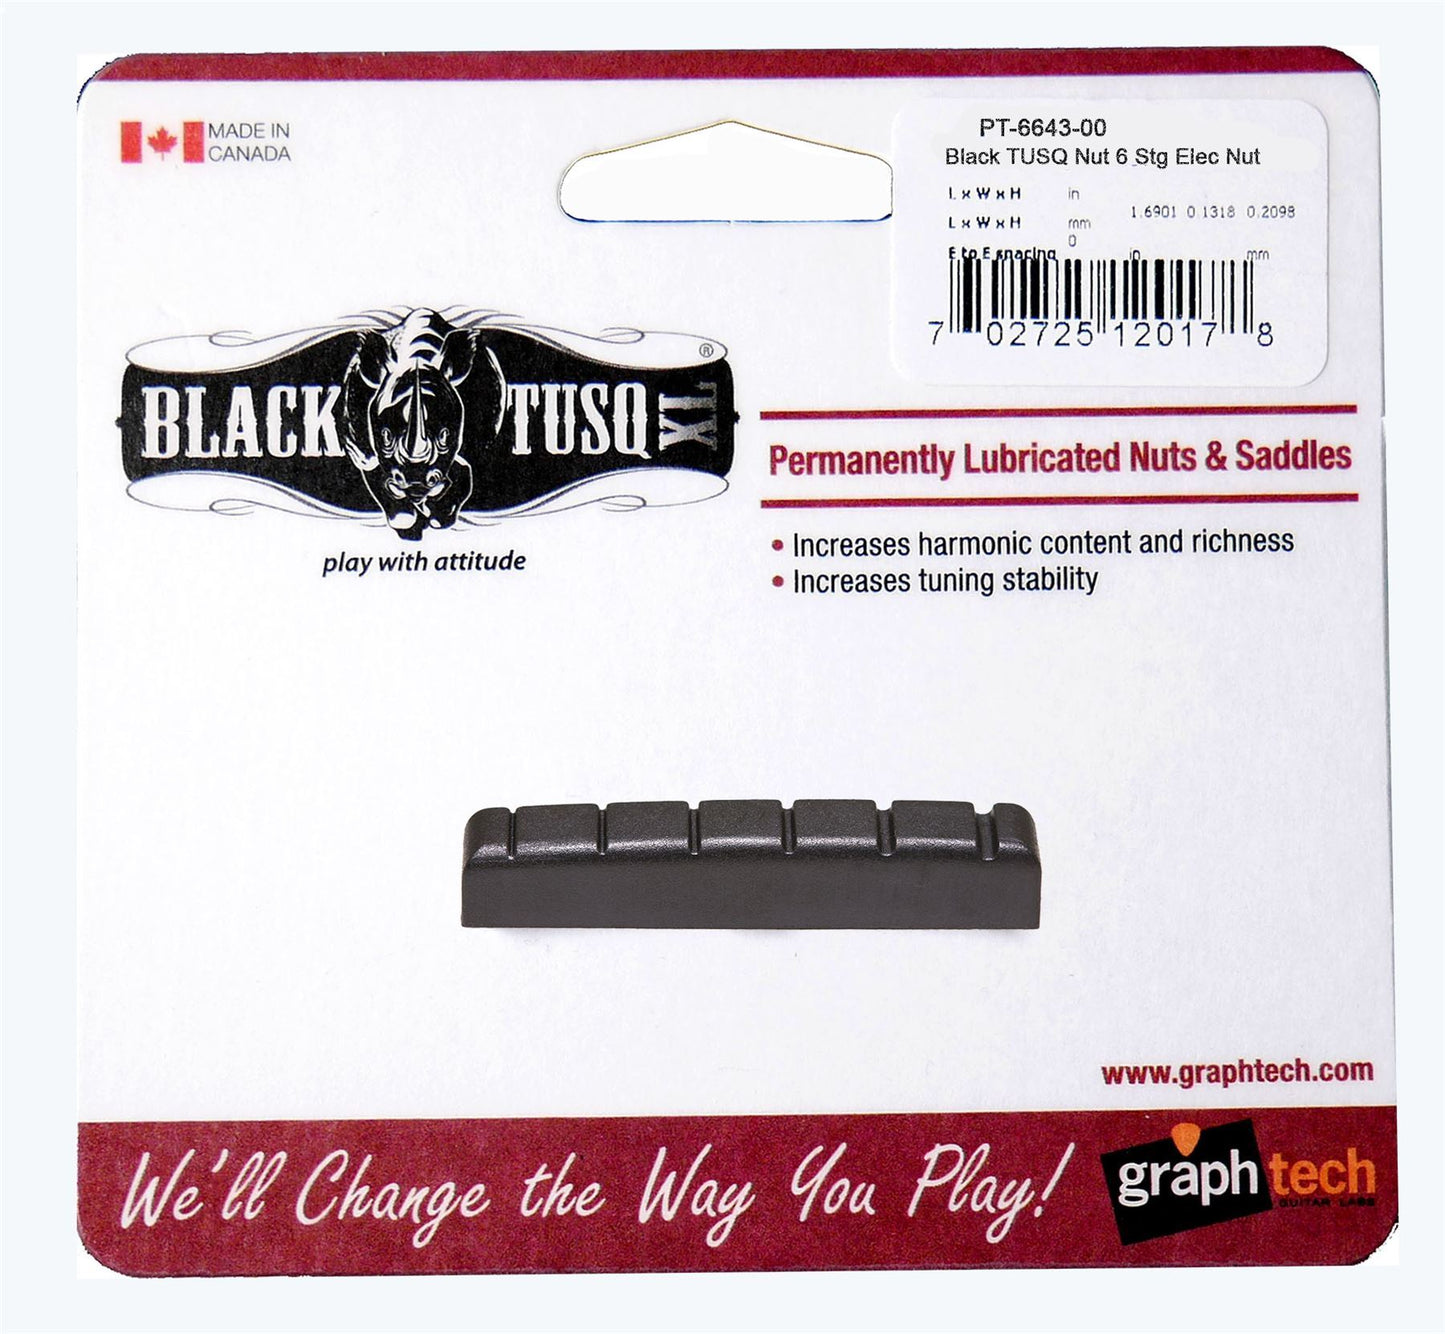 Graphtech Black Tusq XL Nut Slotted 43 X 6 For Acoustic or Electric Guitar